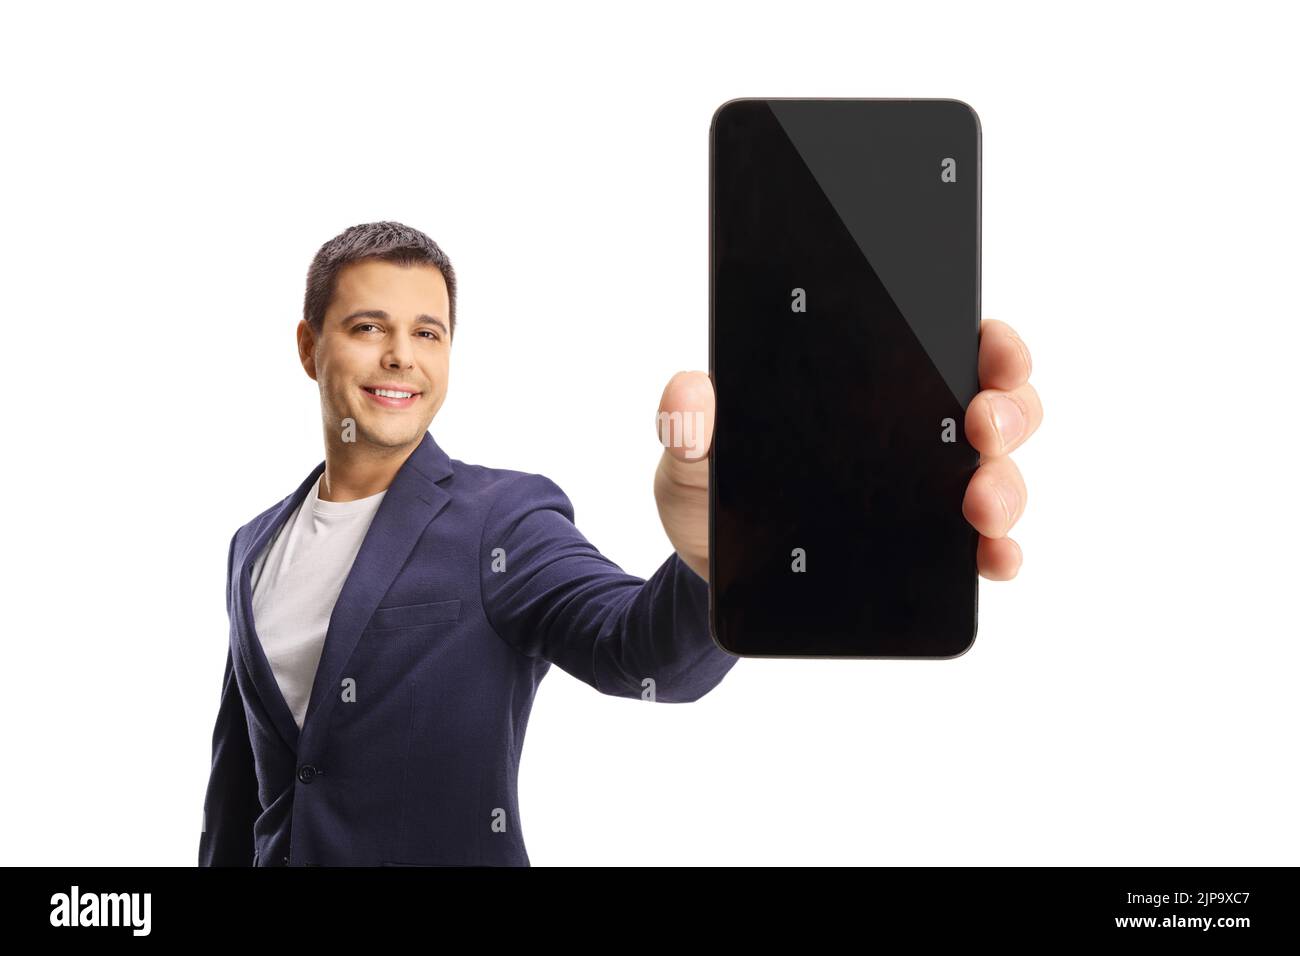 Man showing a blank screen of a smartphone in front of camera isolated on white background Stock Photo